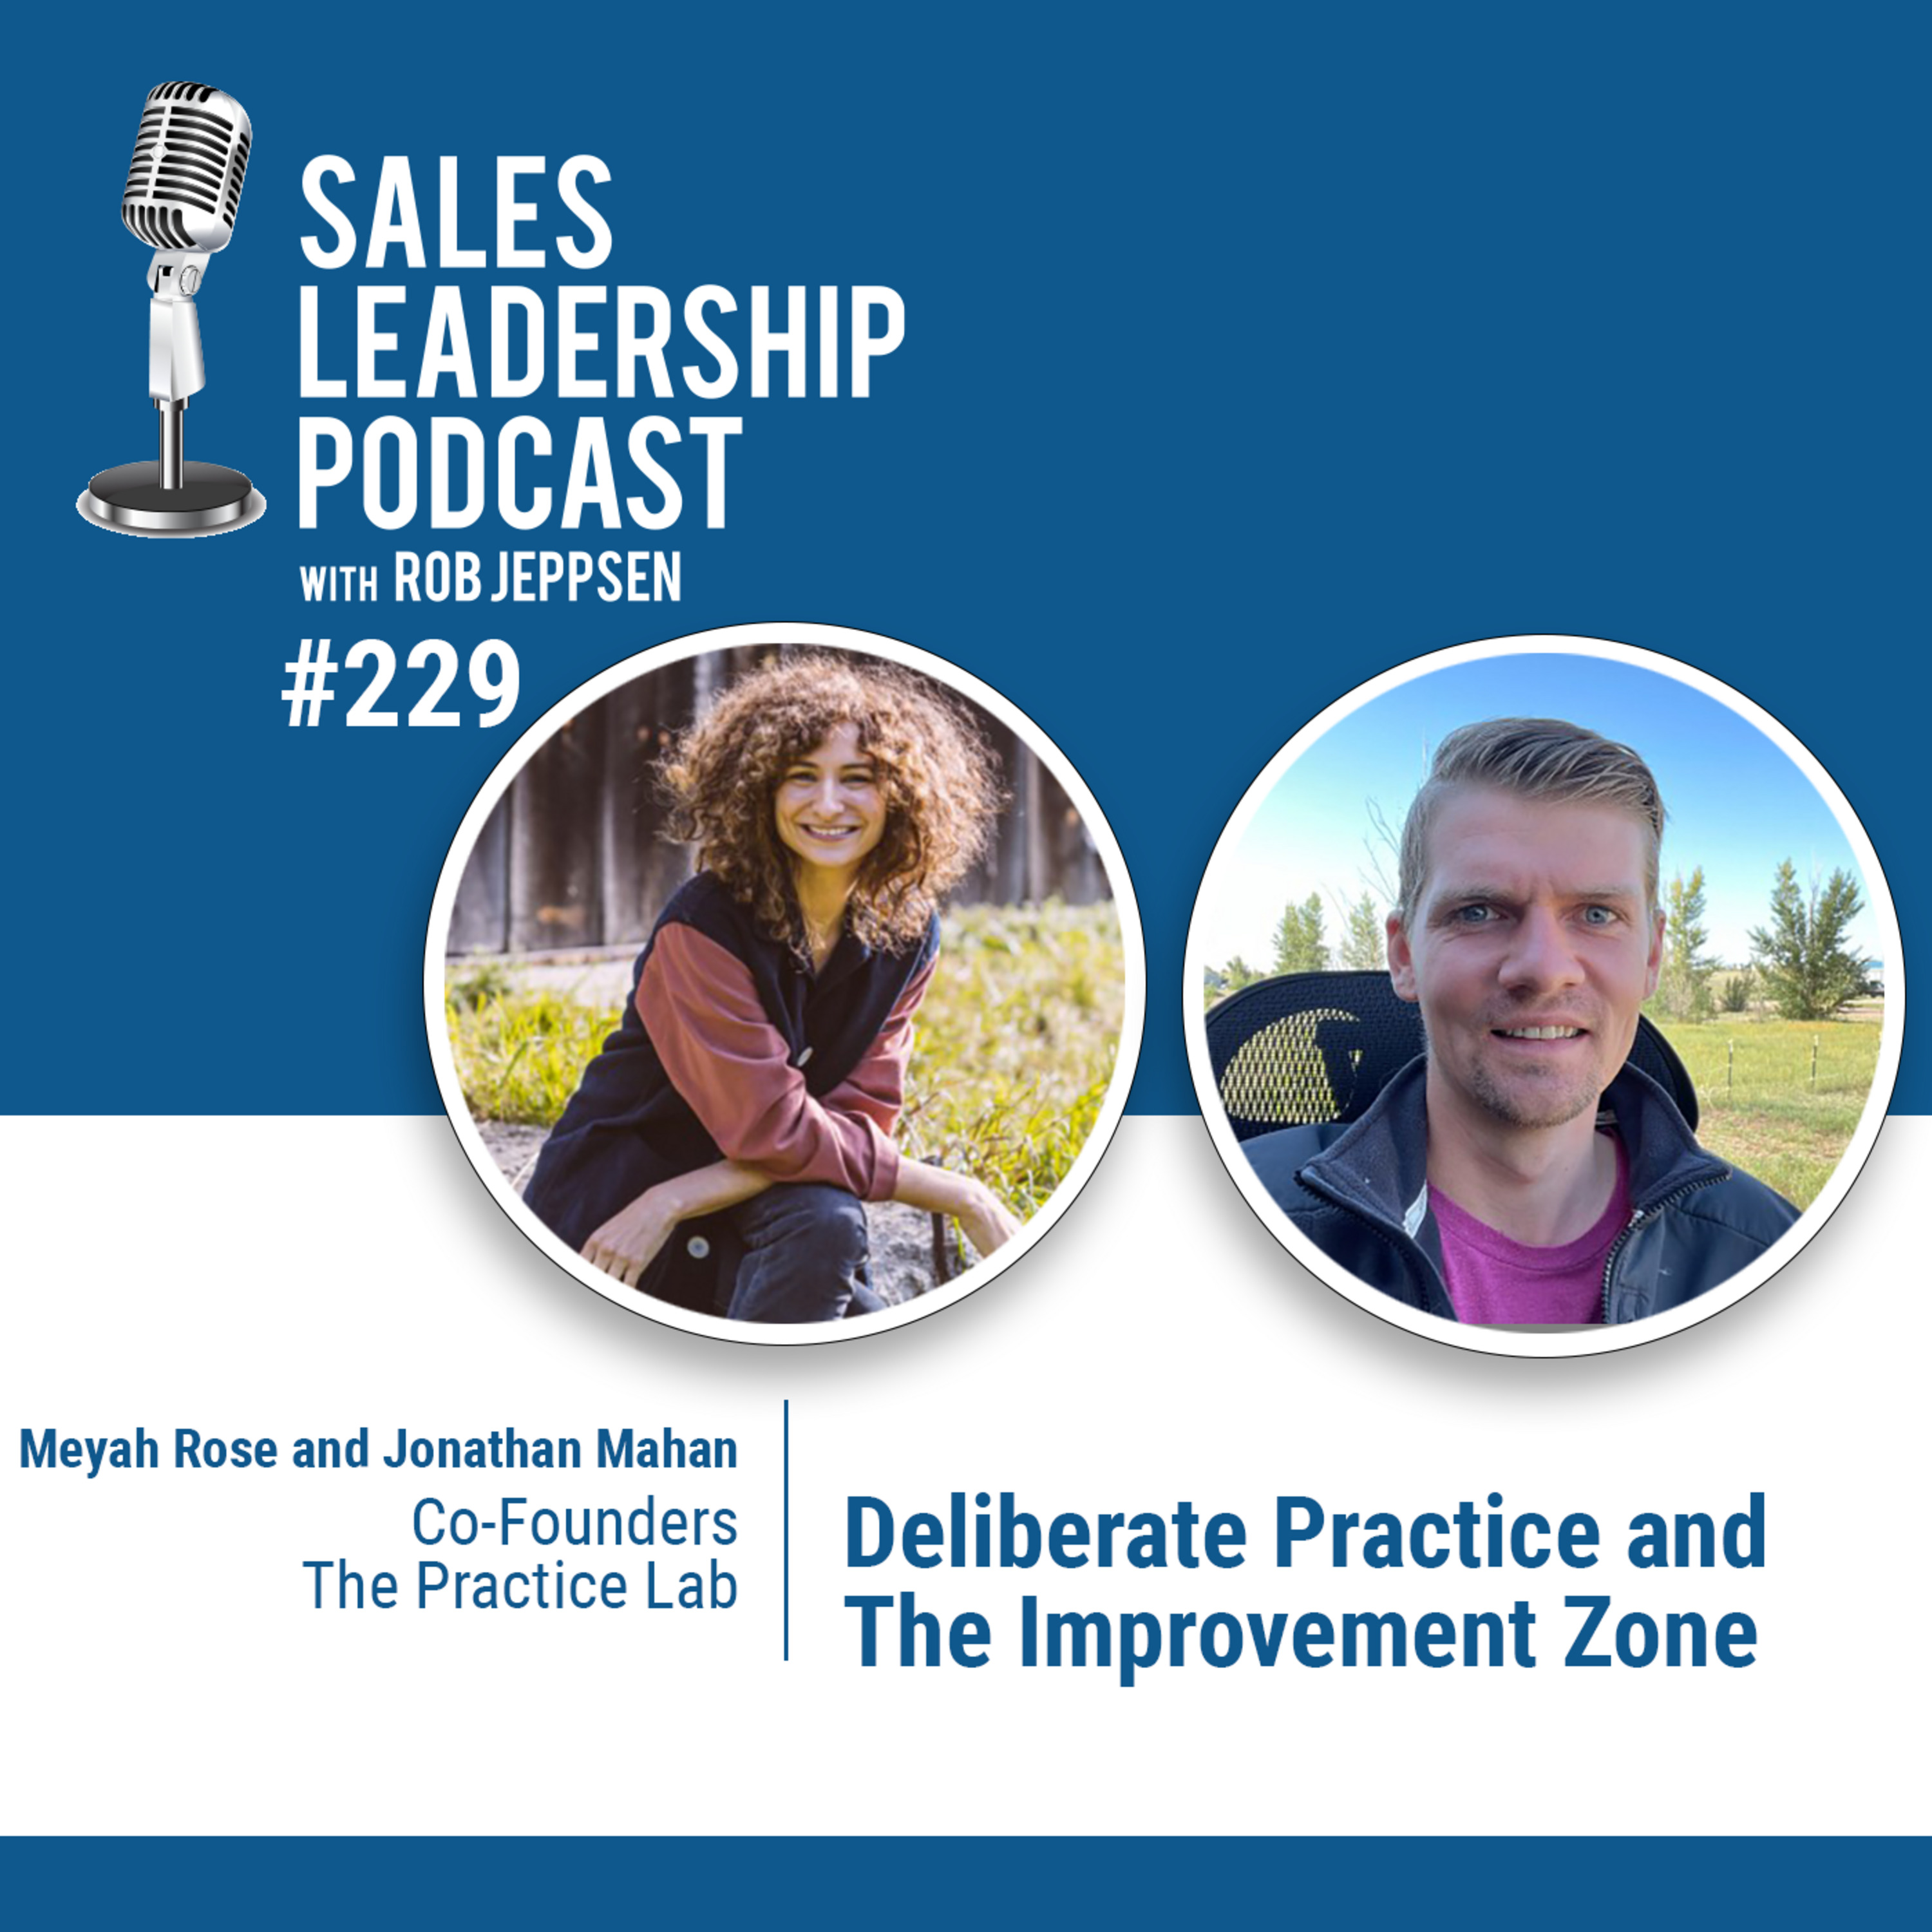 Episode 230: Jordana Zeldin and Jonathan Mahan, Co-Founders of The Practice Lab: Deliberate Practice and The Improvement Zone